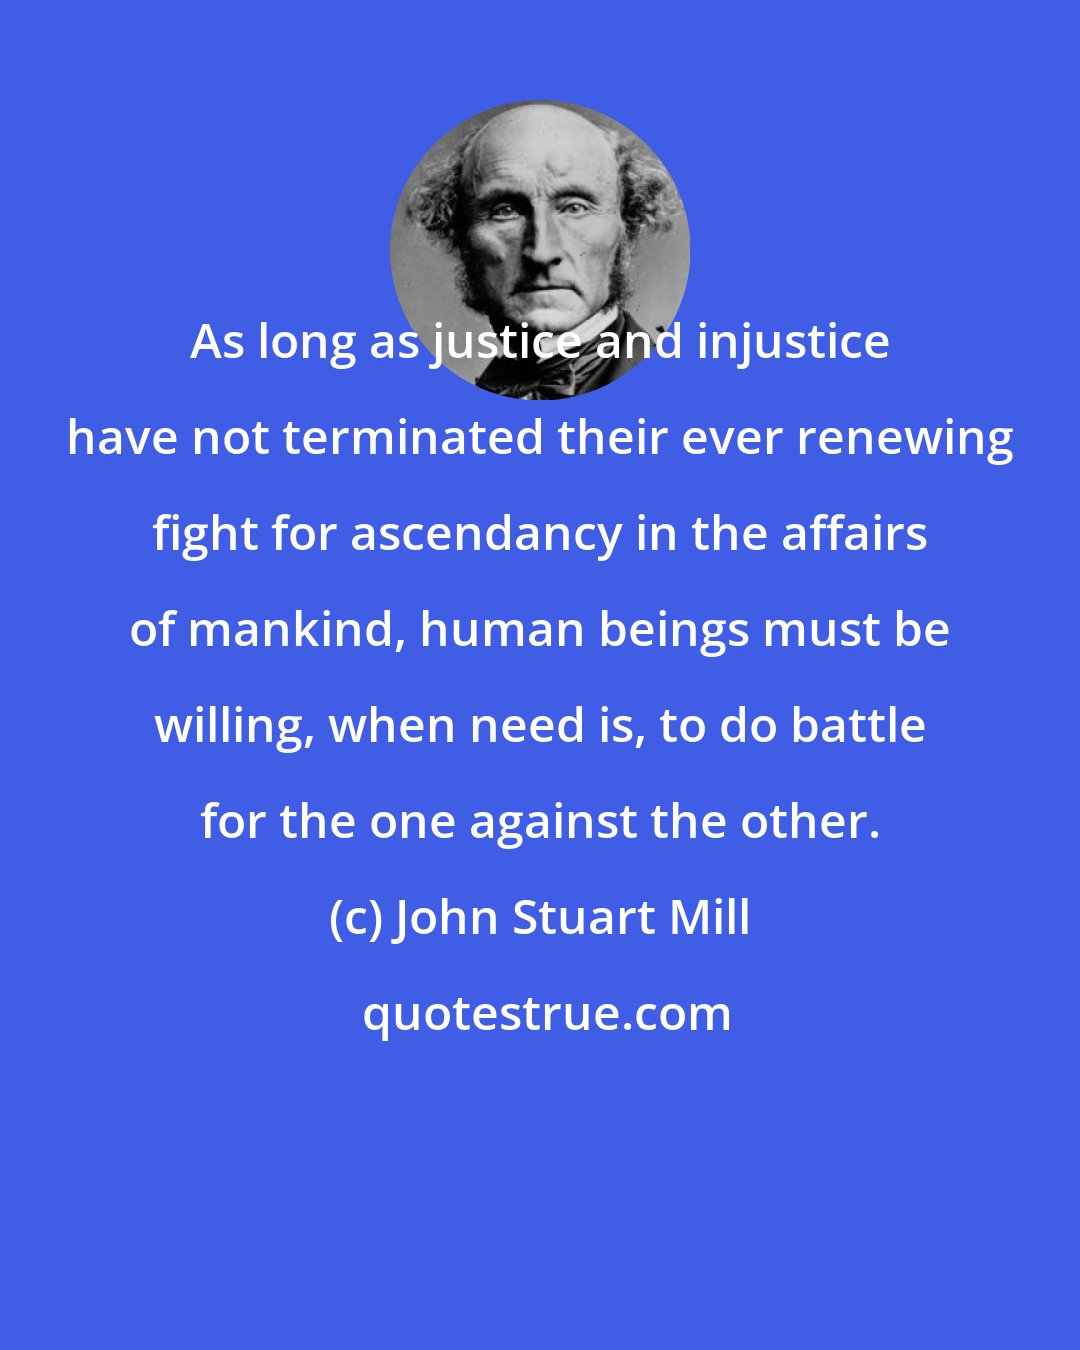 John Stuart Mill: As long as justice and injustice have not terminated their ever renewing fight for ascendancy in the affairs of mankind, human beings must be willing, when need is, to do battle for the one against the other.